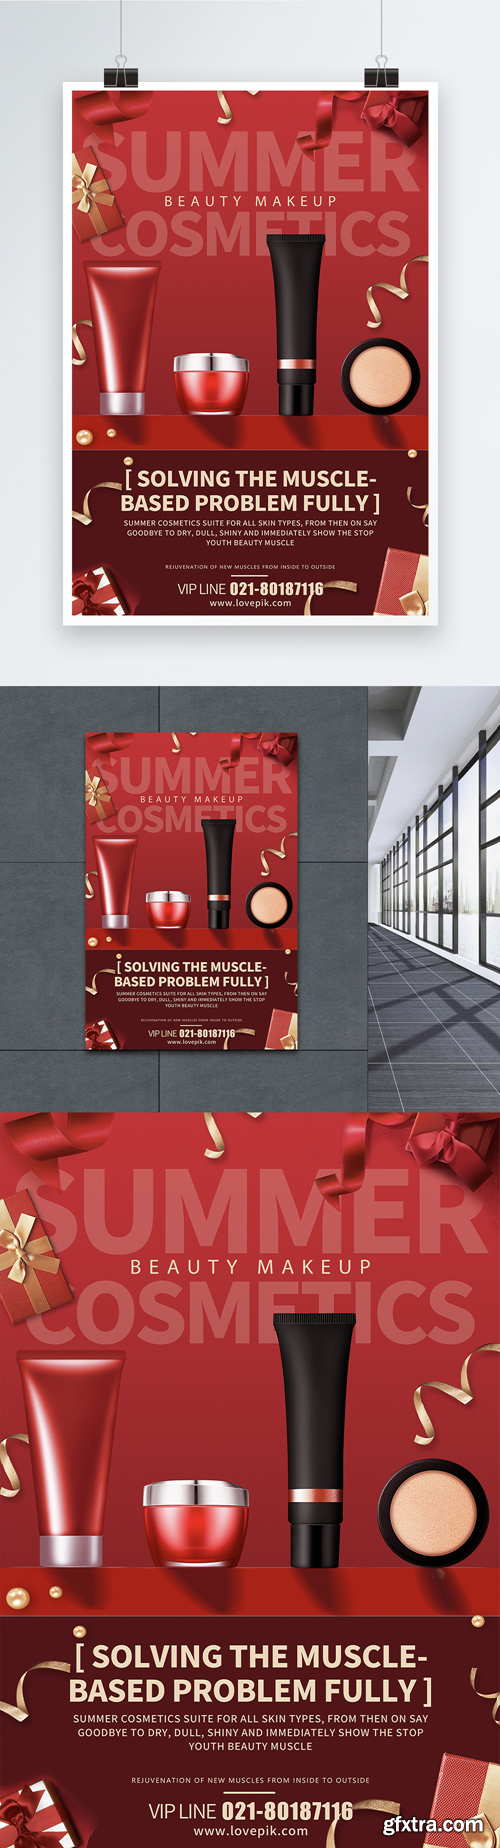 cosmetics promotion posters